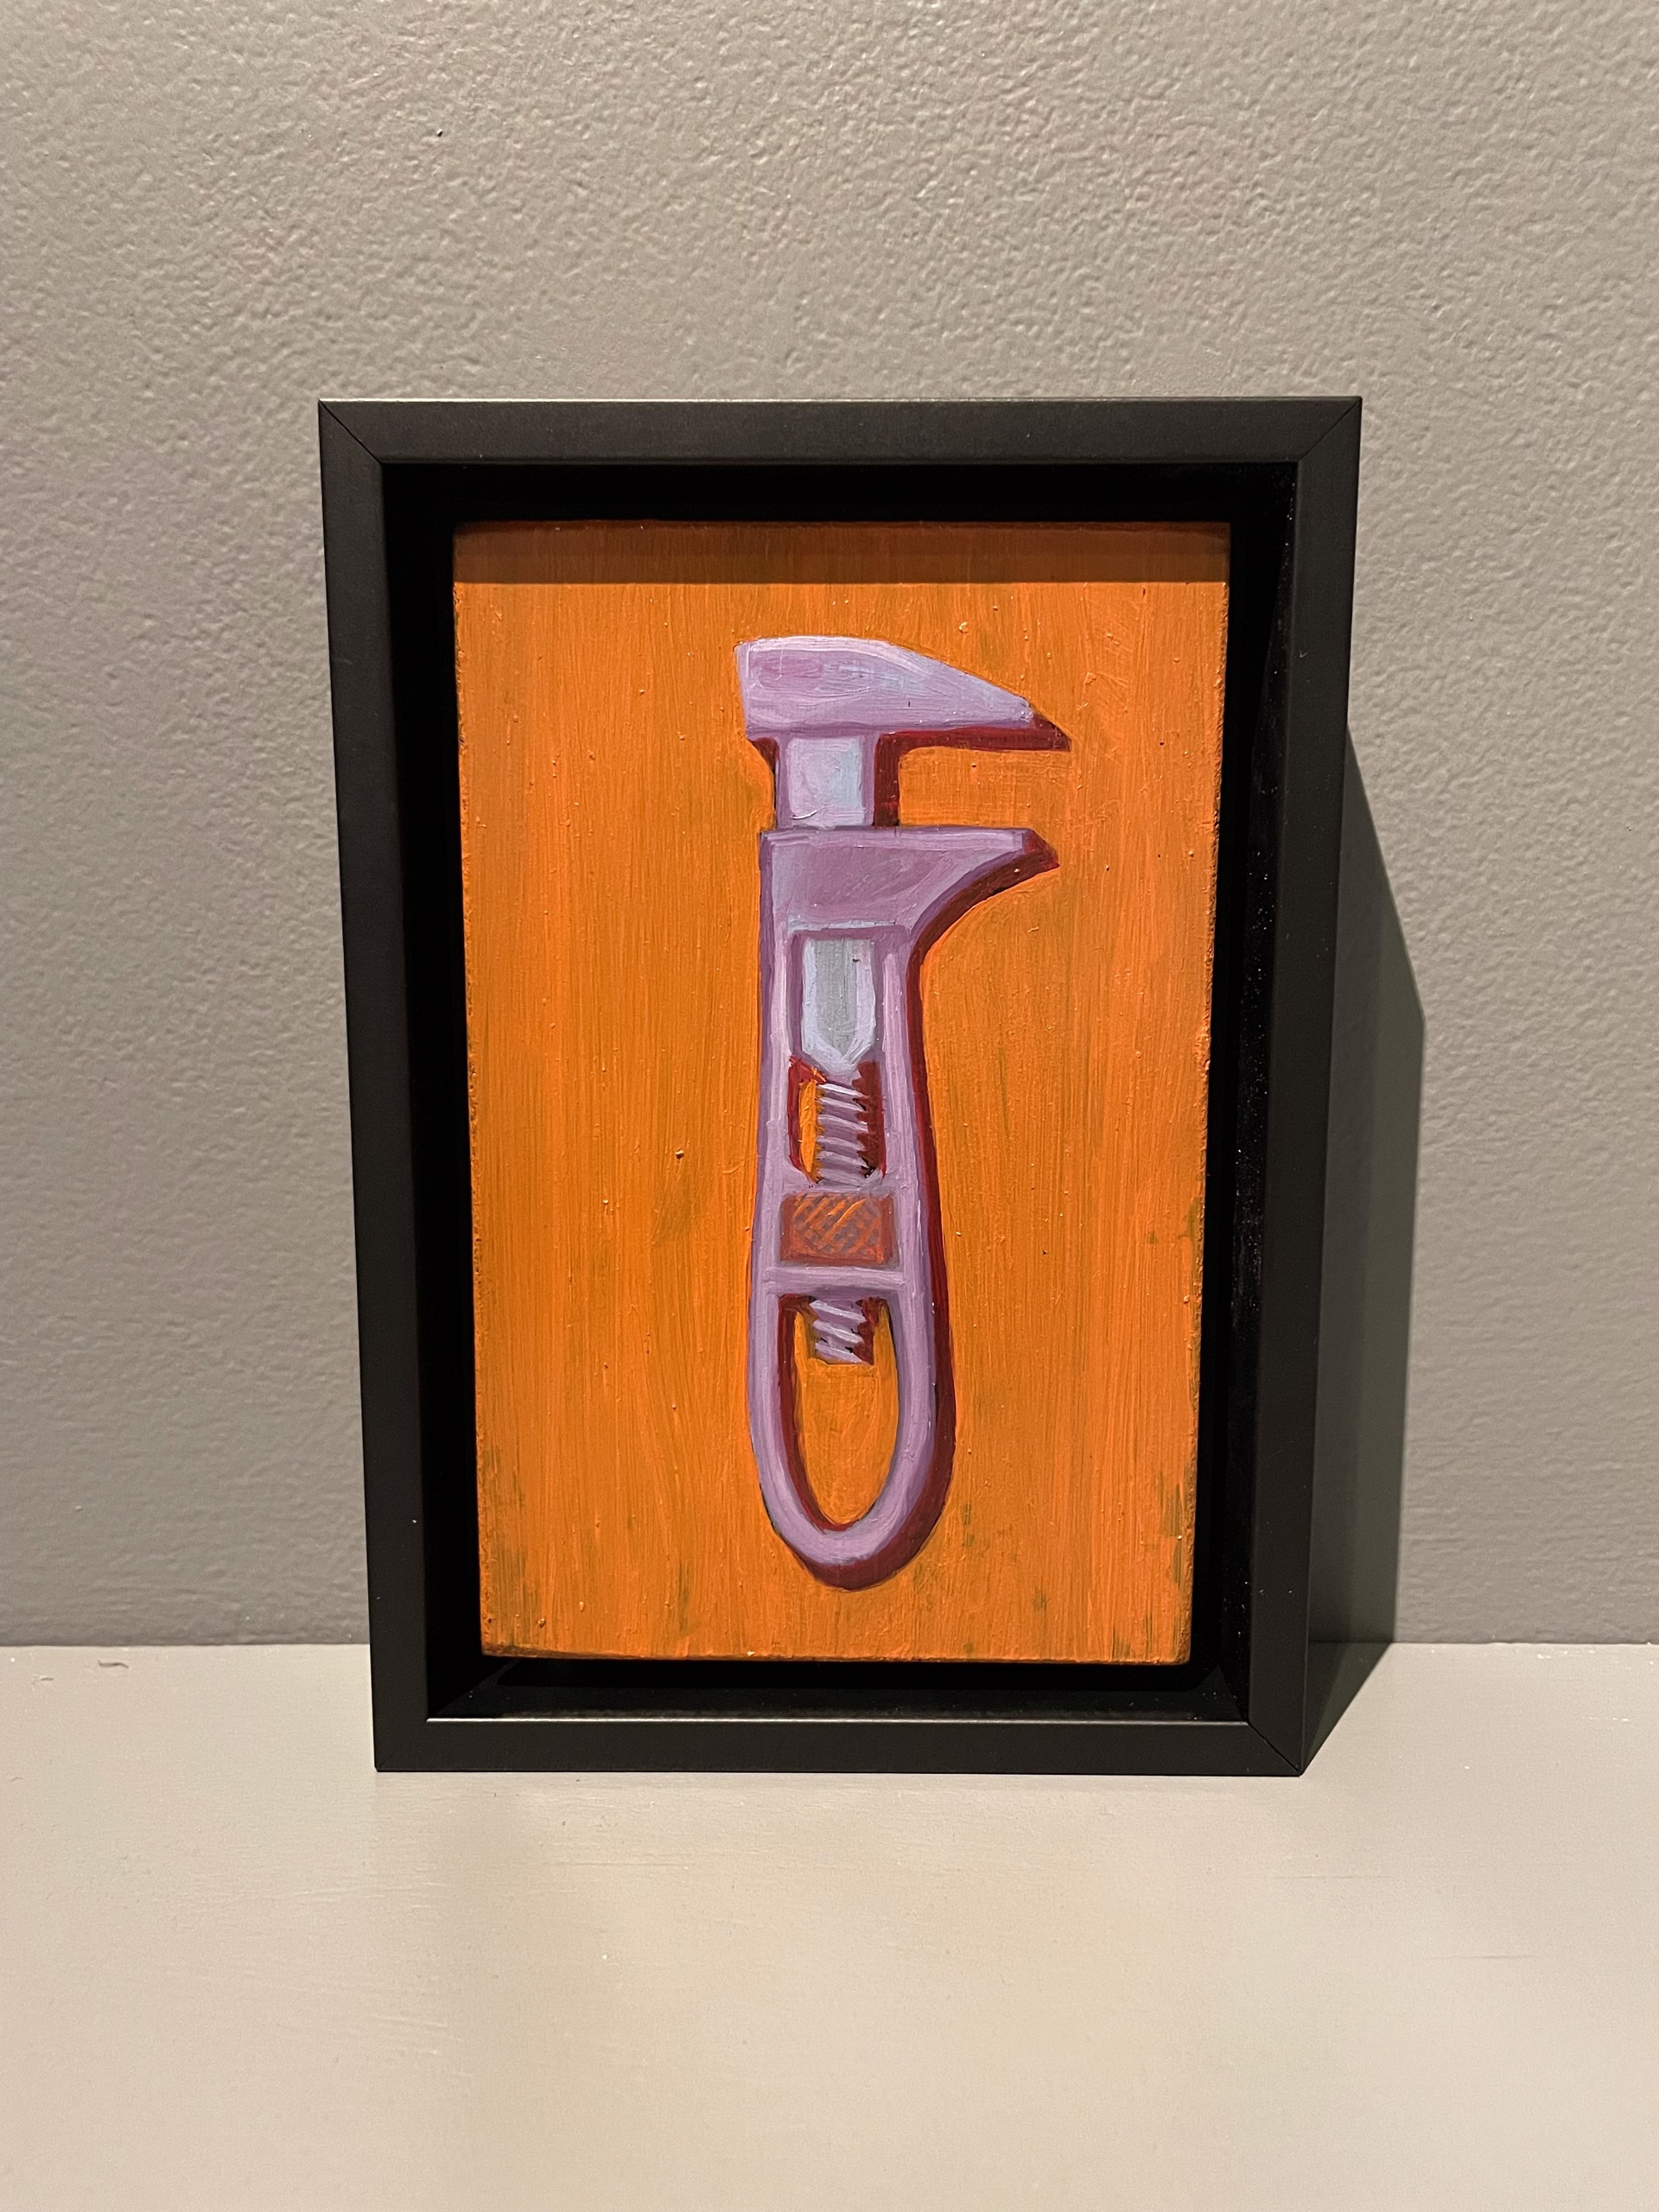 Tool No. 44 by Stephen Wells